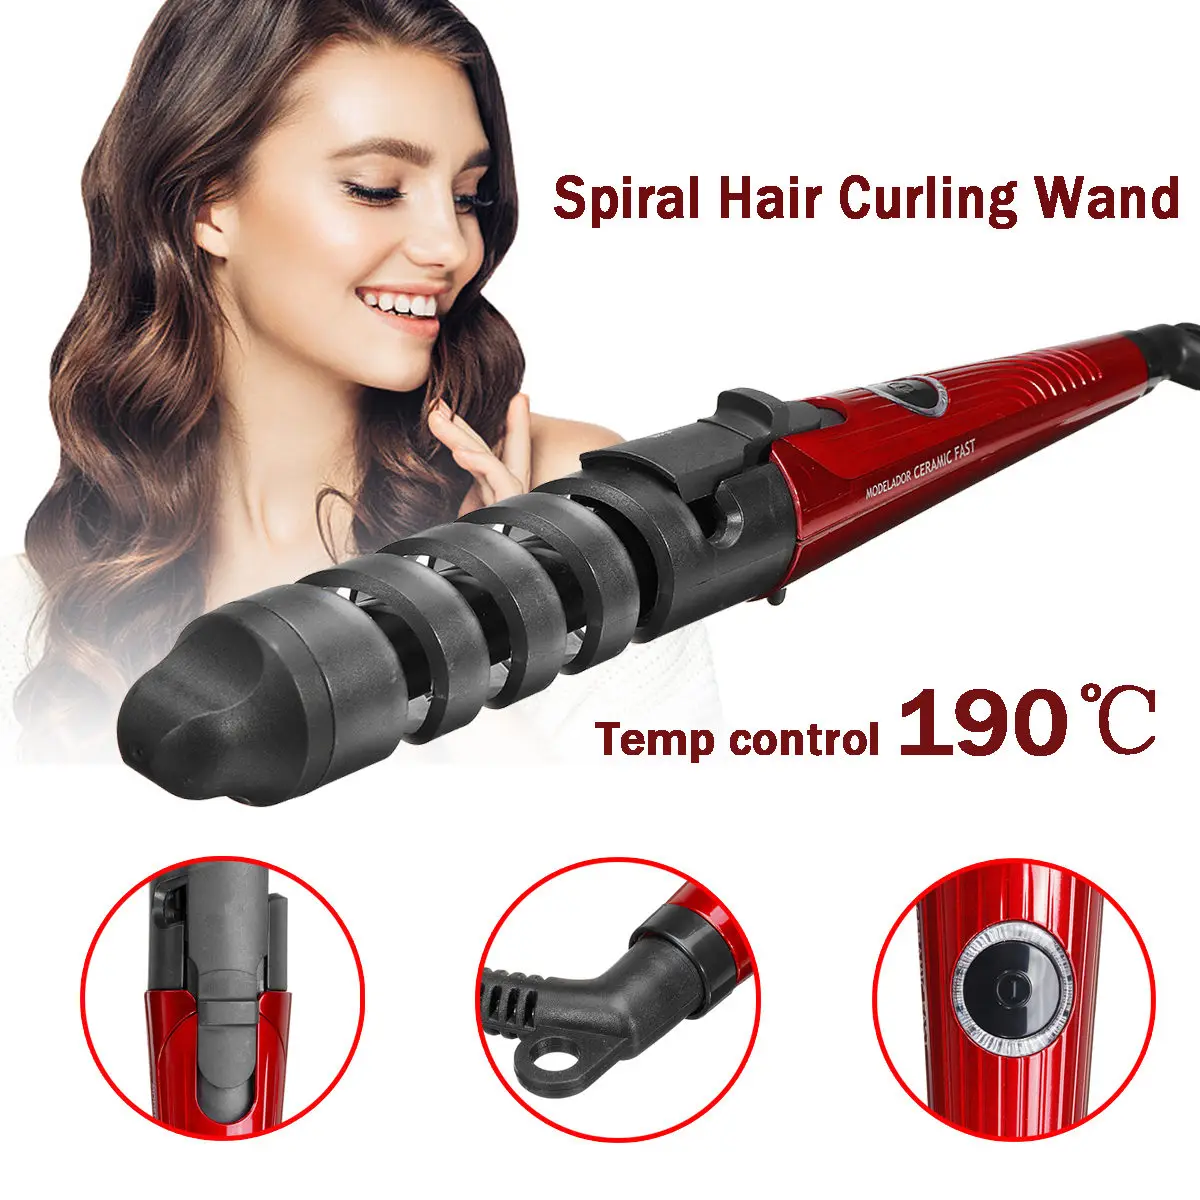 

Professional Electric Hair Curler 110-220V 45W PTC Roller Spiral Curling Iron Wand Curl Styler Salon Styling Tools Set with Box